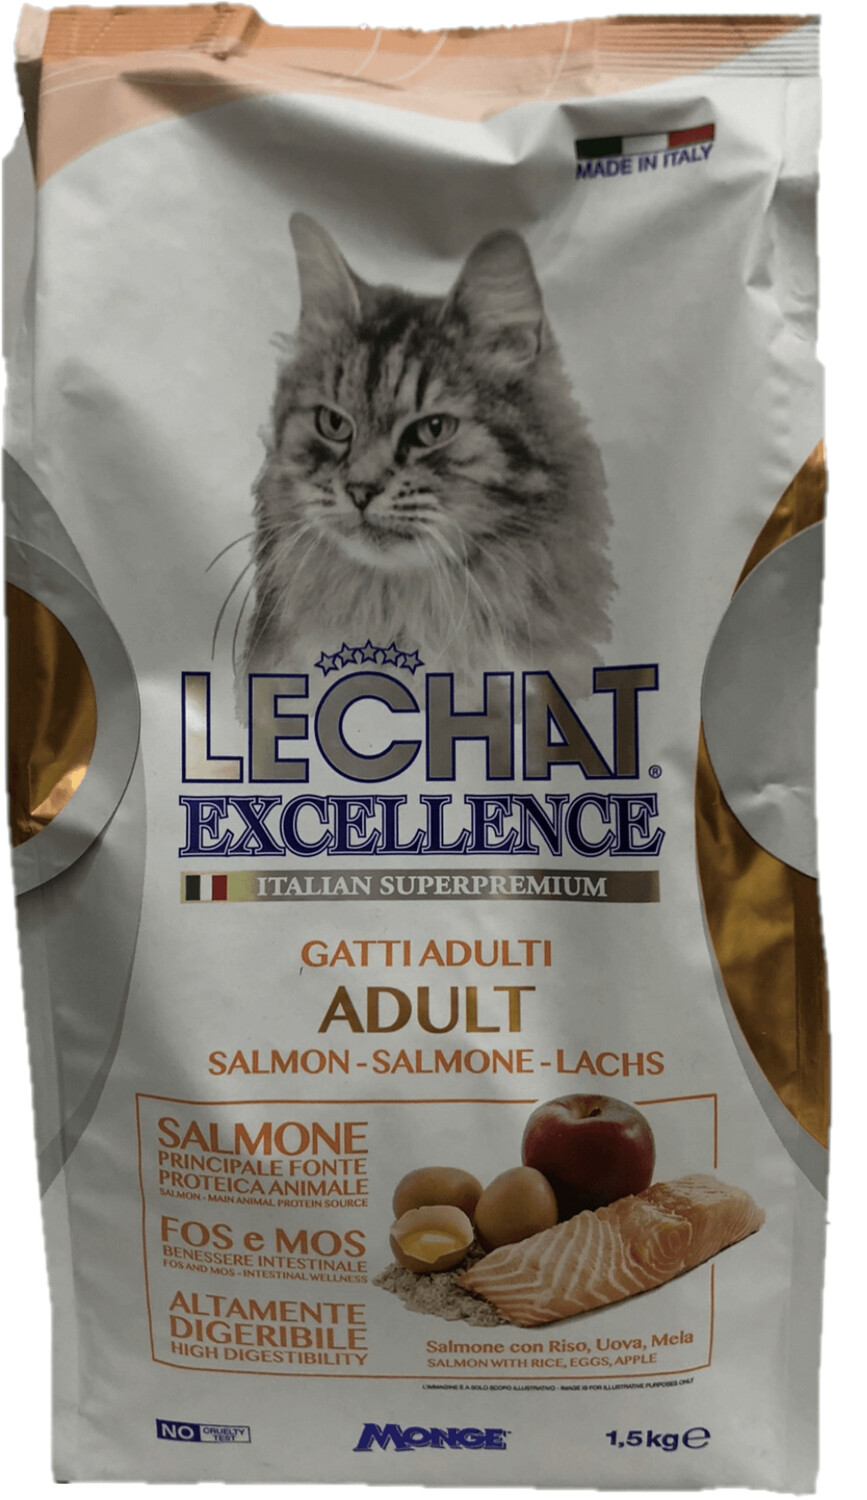 LECHAT EXCELLENCE ADULT SALMONE KG 1.5